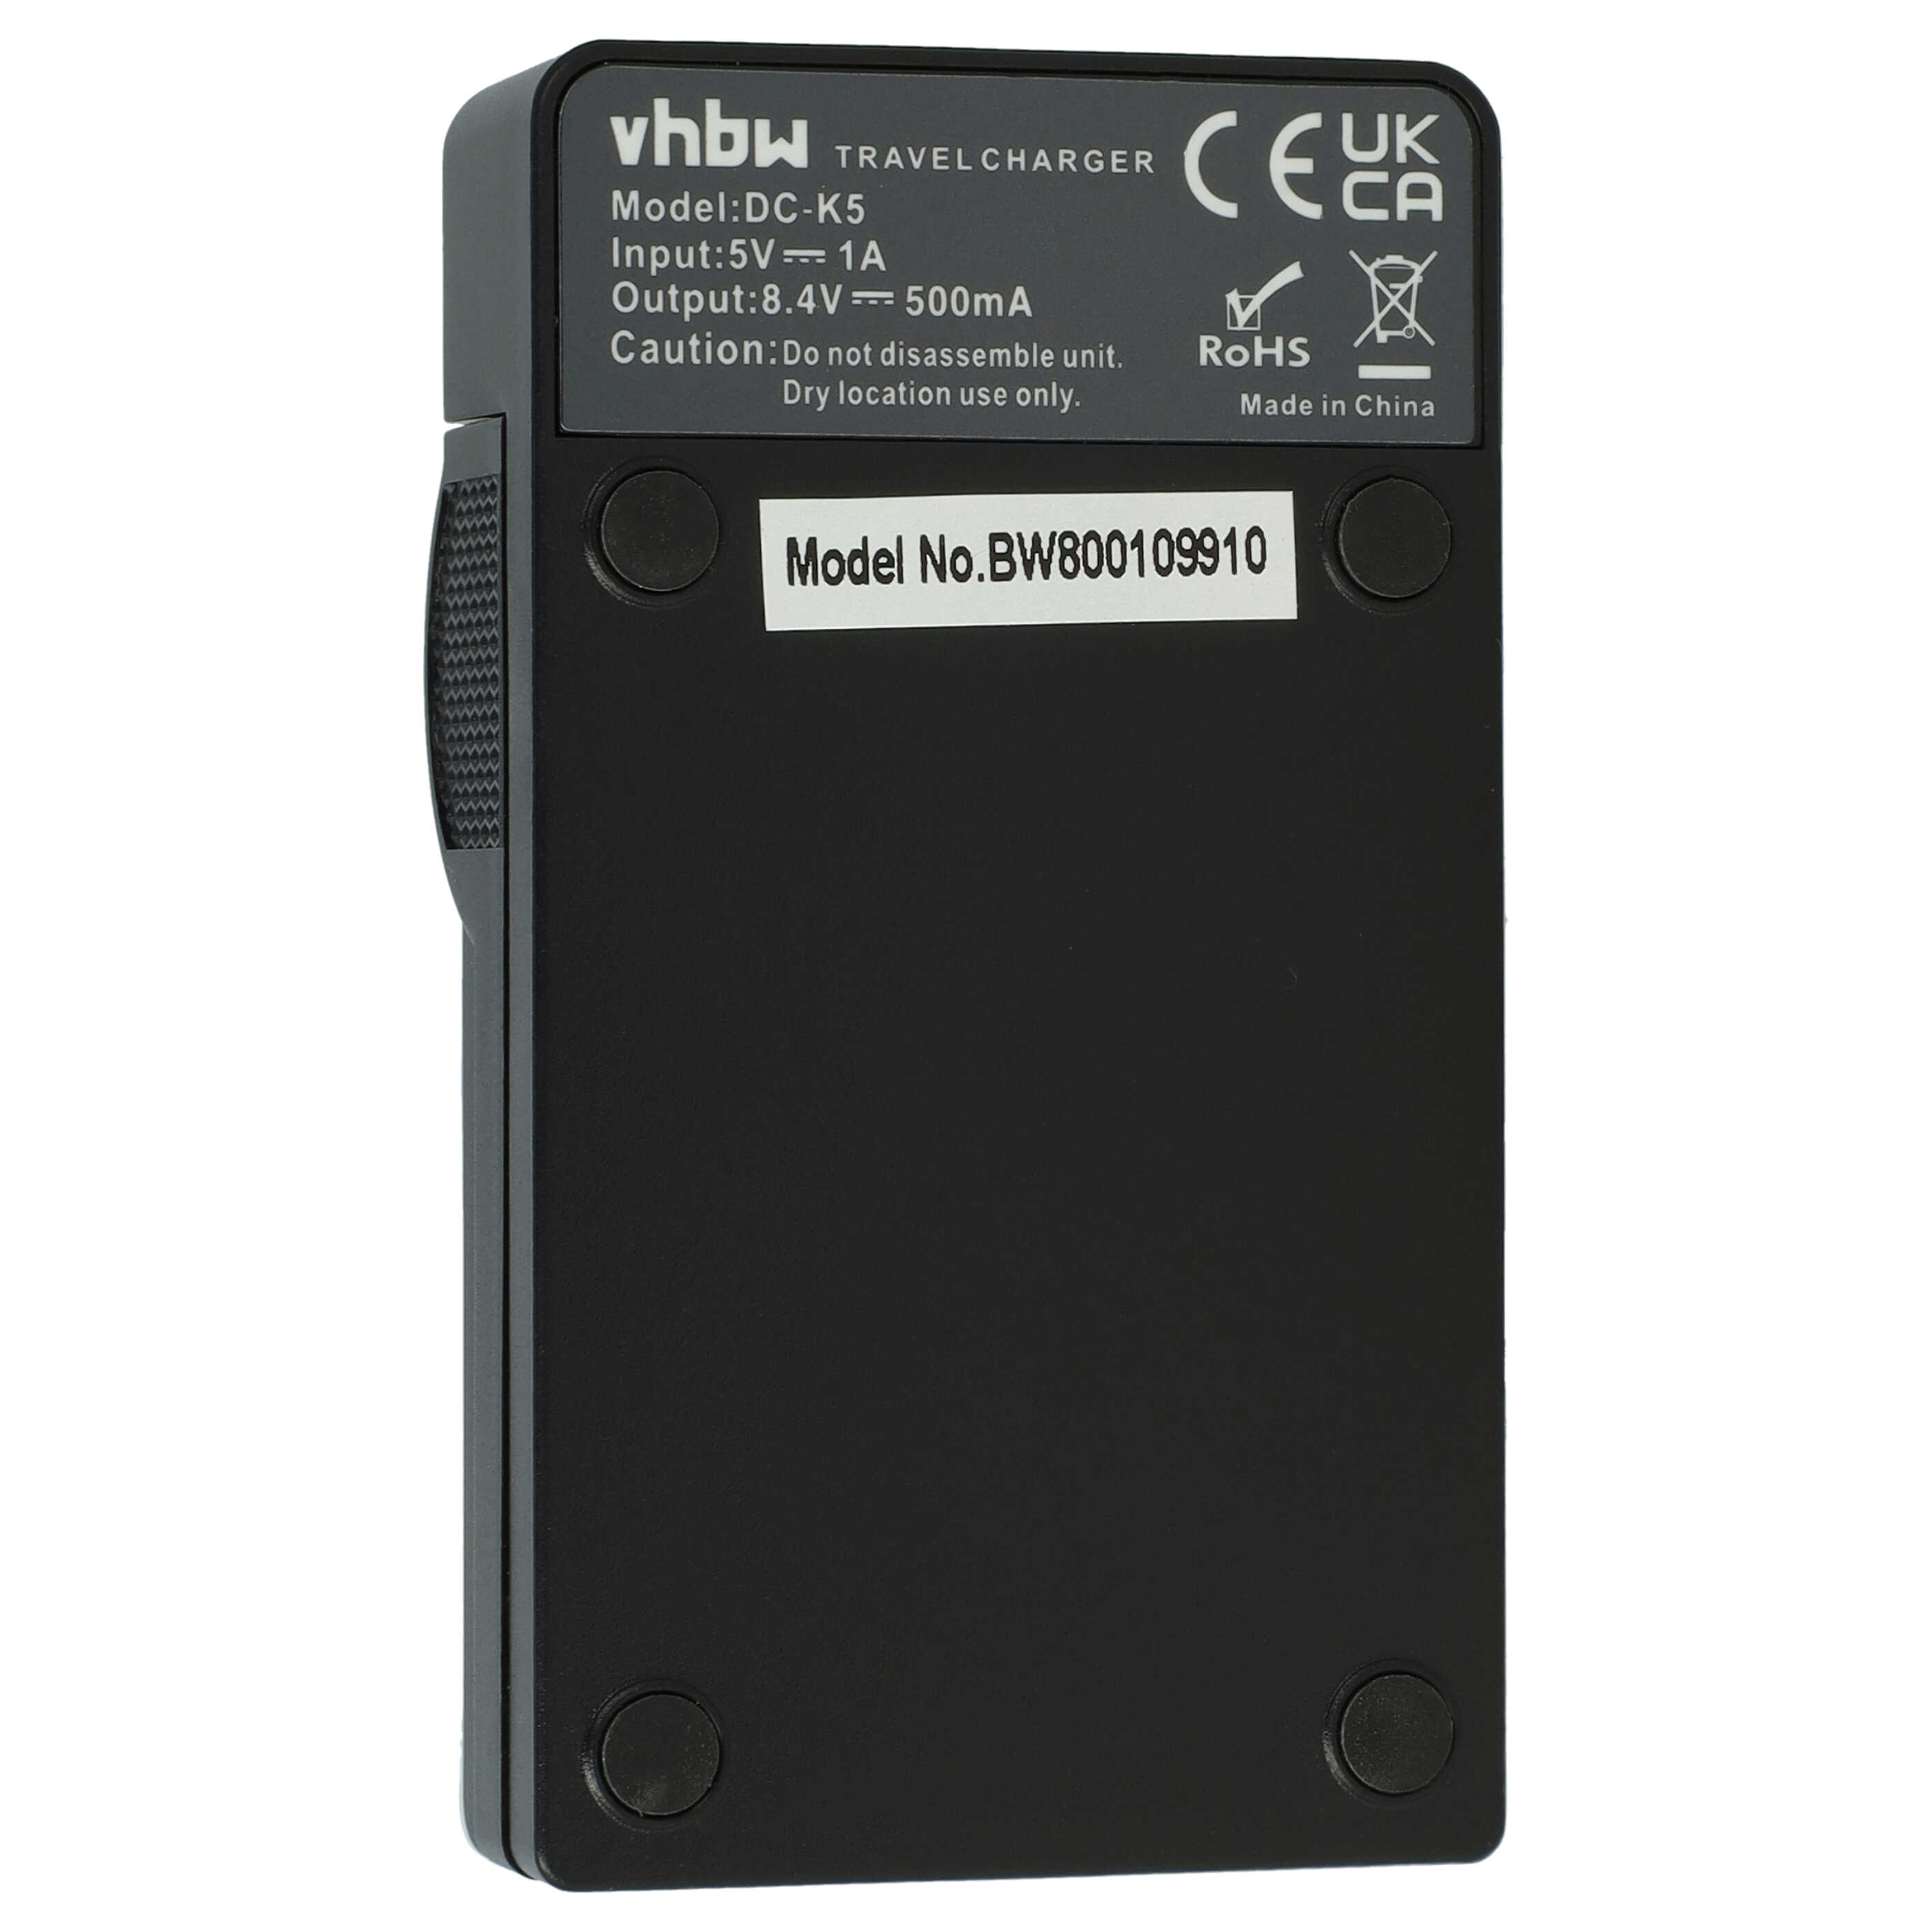 Battery Charger suitable for HDC-SD1 Camera etc. - 0.5 A, 8.4 V